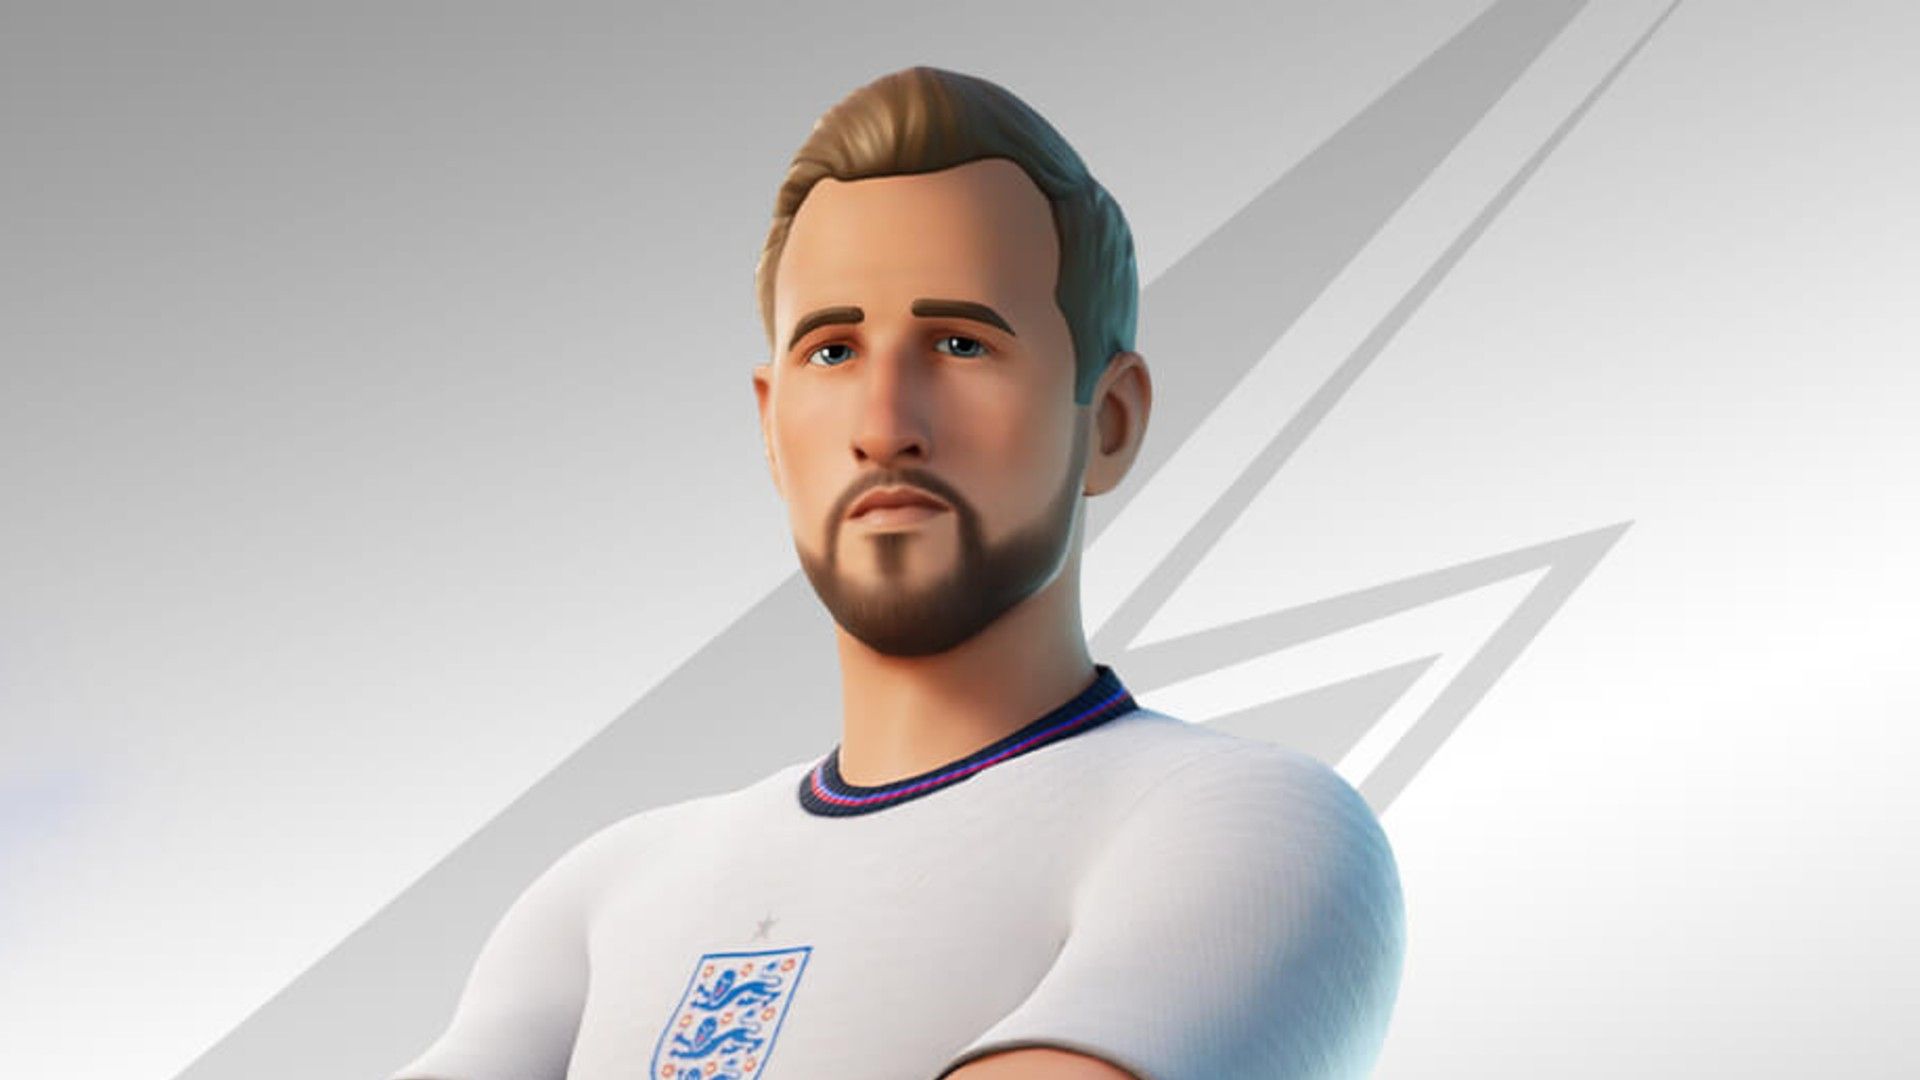 Fortnite item shop: England captain Harry Kane and Germany's Marco Reus debut as new skins